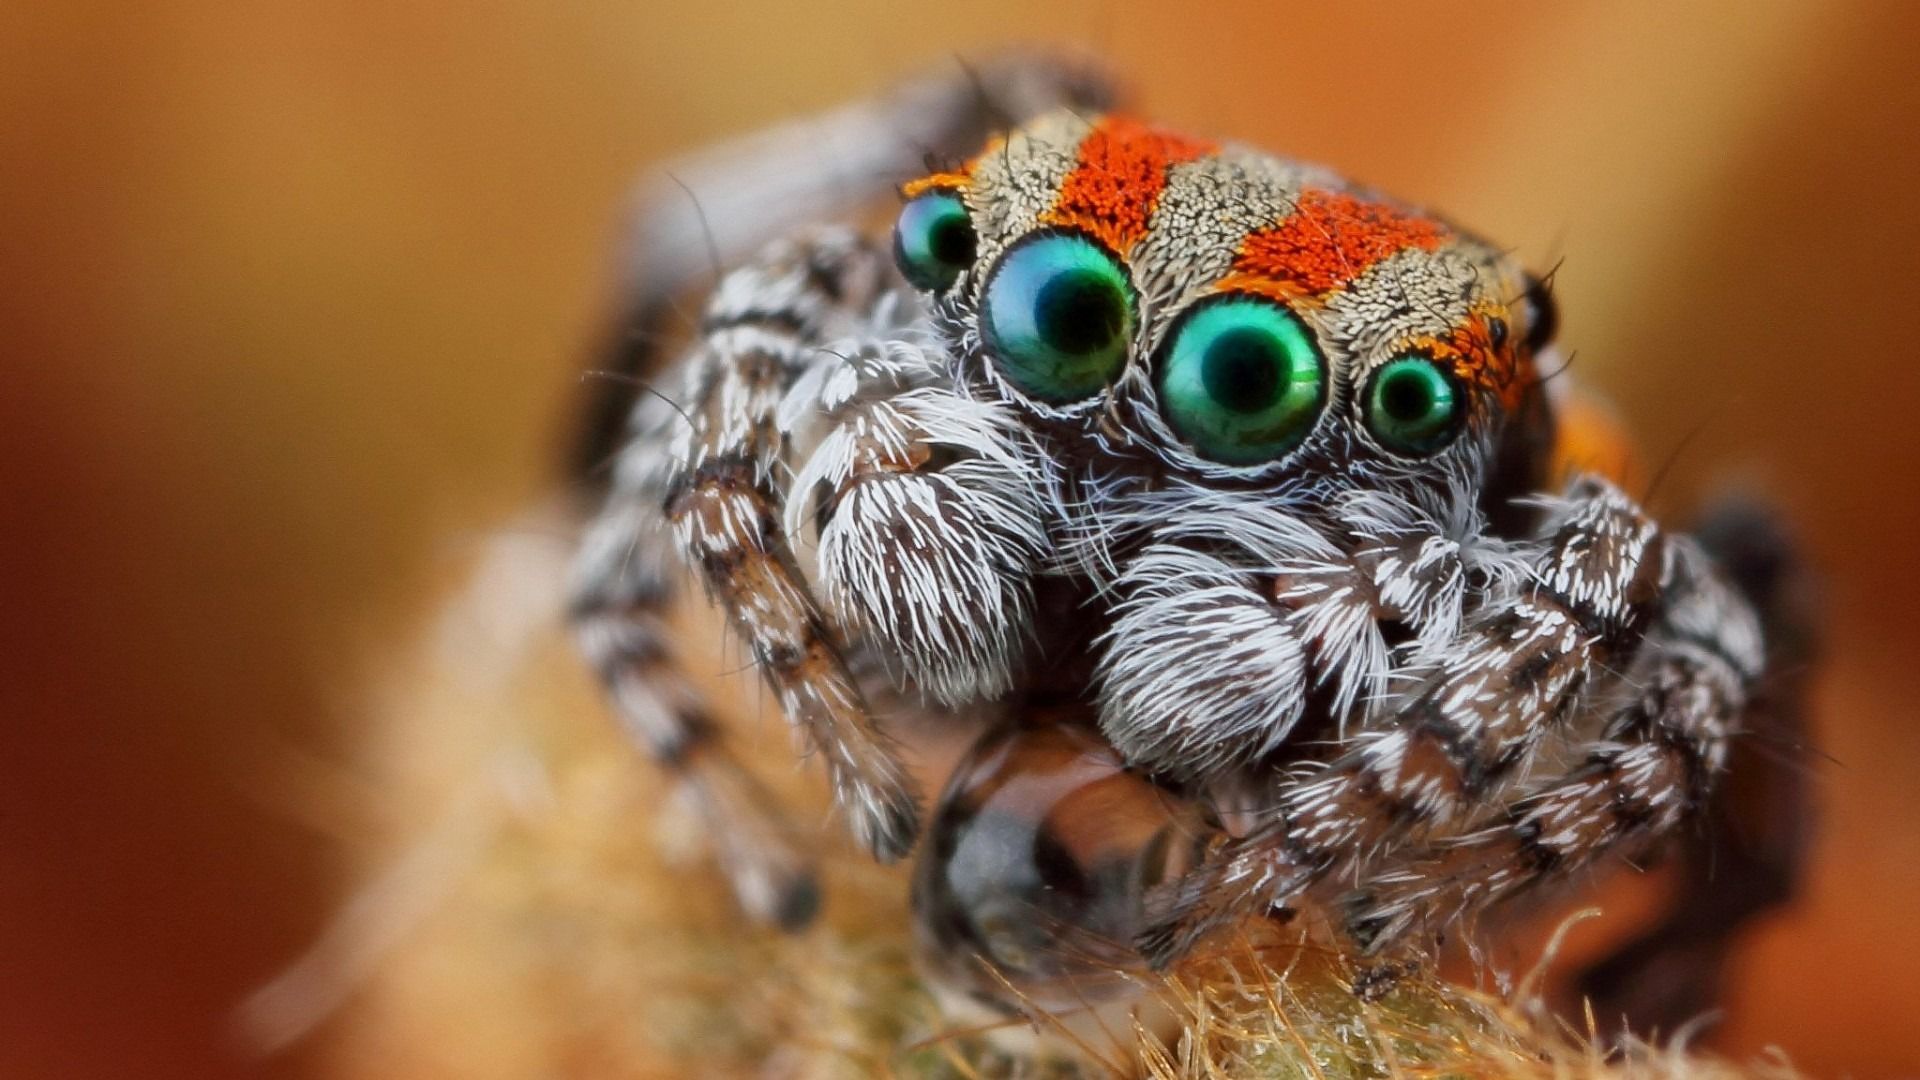 Image for Macro Photography Eye Wallpaper HD Desktop. Jumping spider, Insects, Arachnids spiders